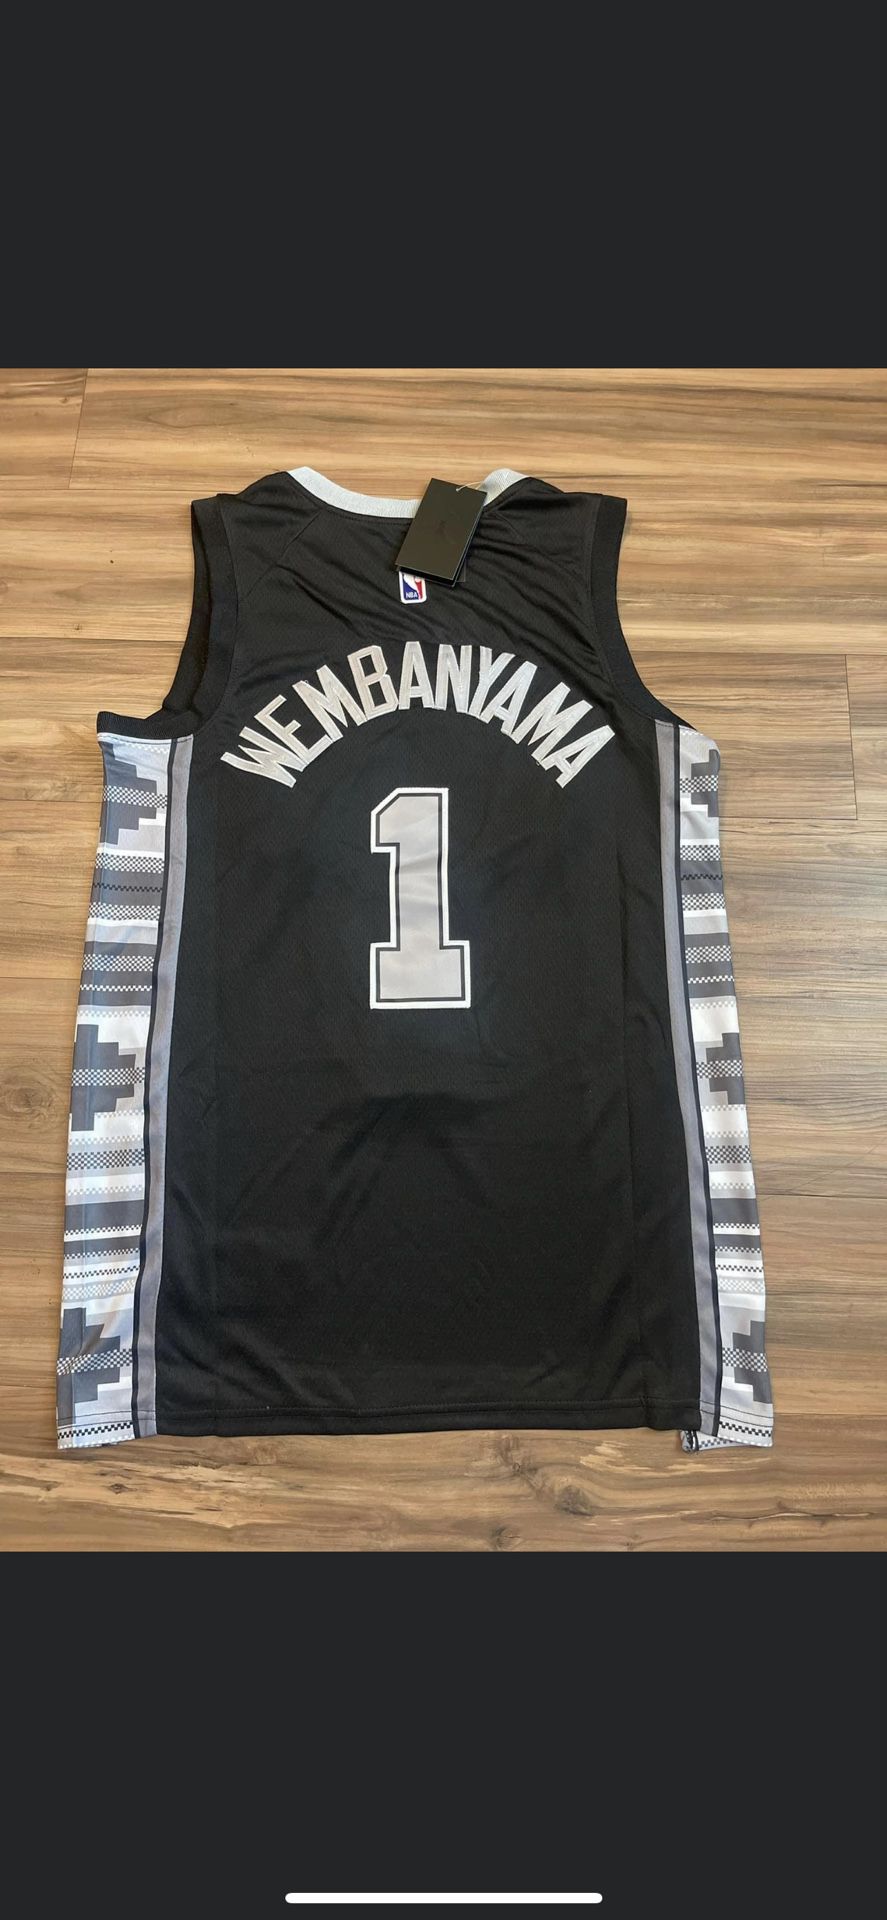 Wemby Spurs Jersey for Sale in San Antonio, TX - OfferUp